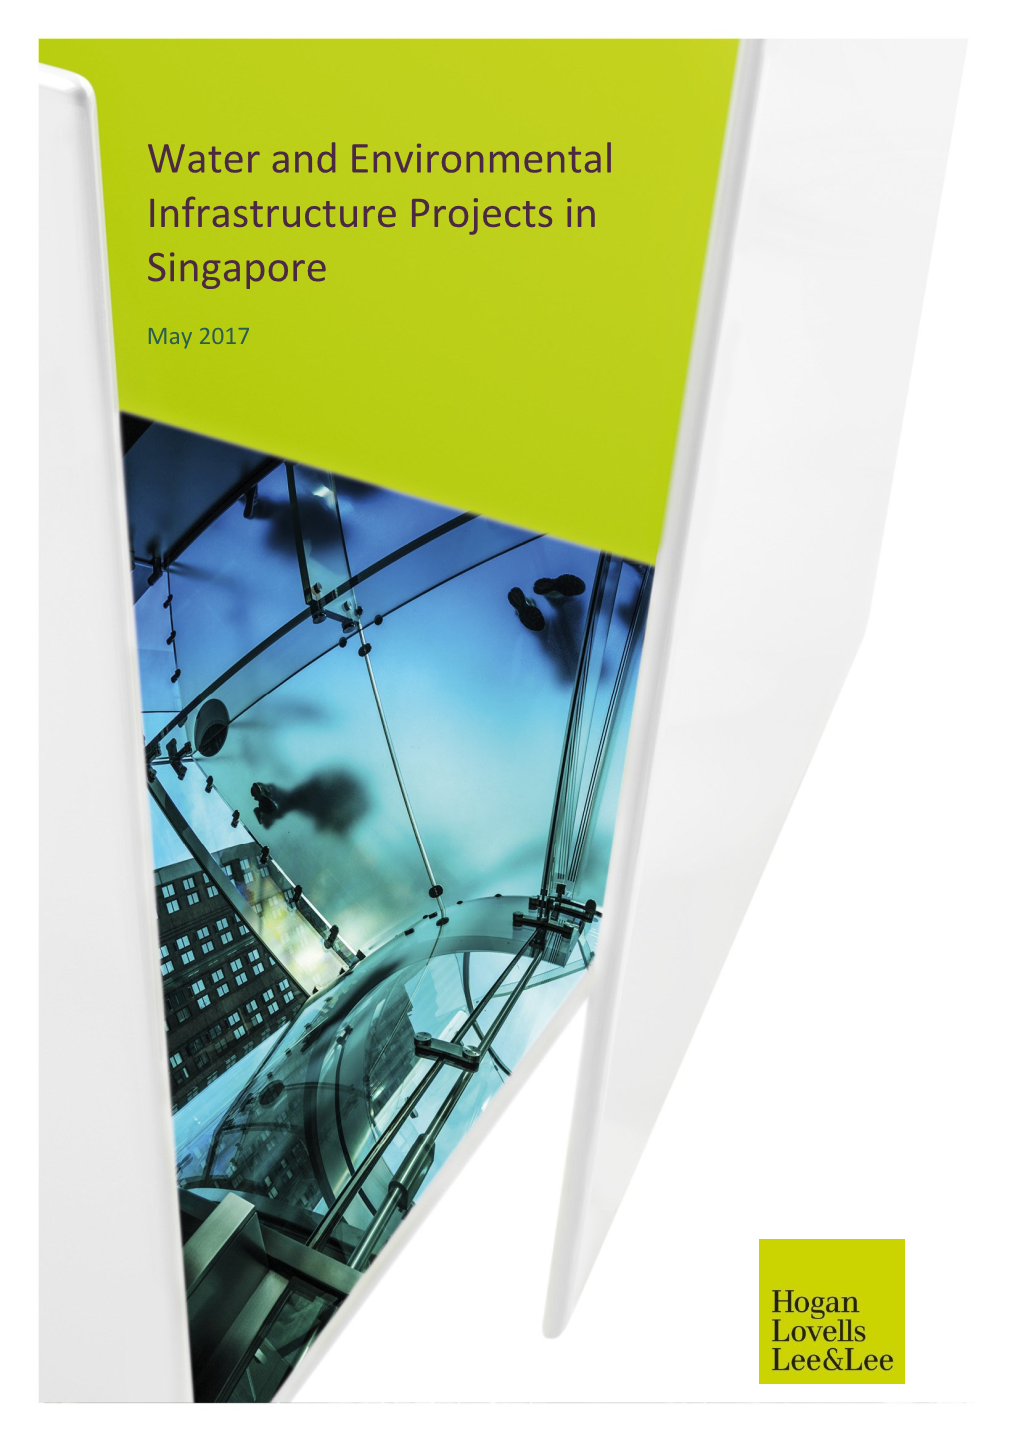 Water and Environmental Infrastructure Projects in Singapore